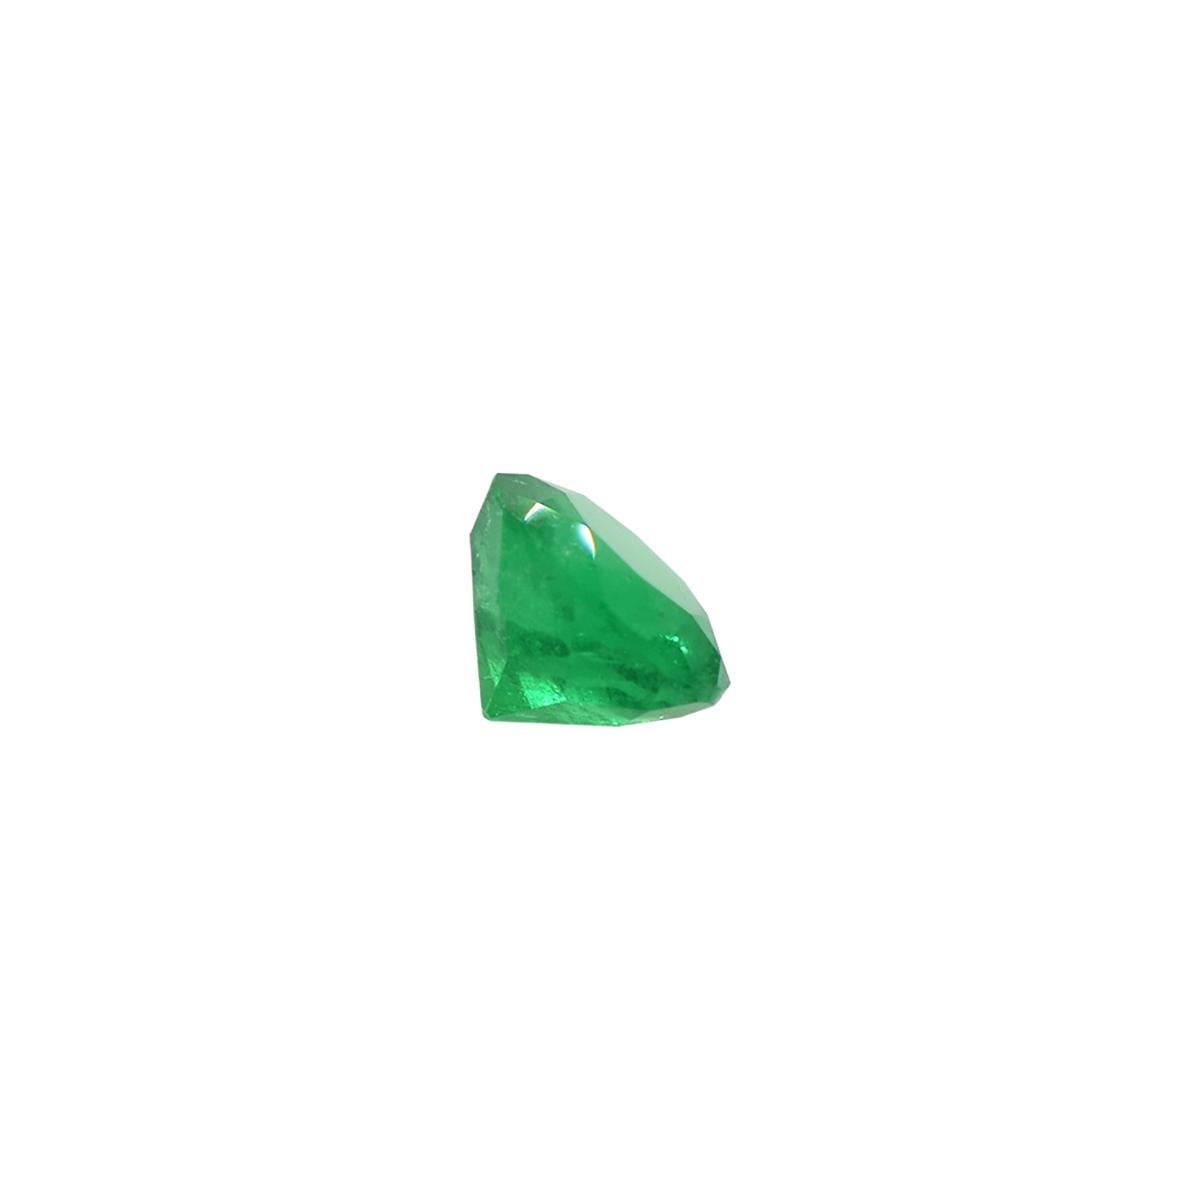 This fantastic 0.74 carats round cut loose emerald is the perfect example of high-quality natural Colombian emeralds. This gem presents a medium-dark green color with strong saturation that creates a vivid 